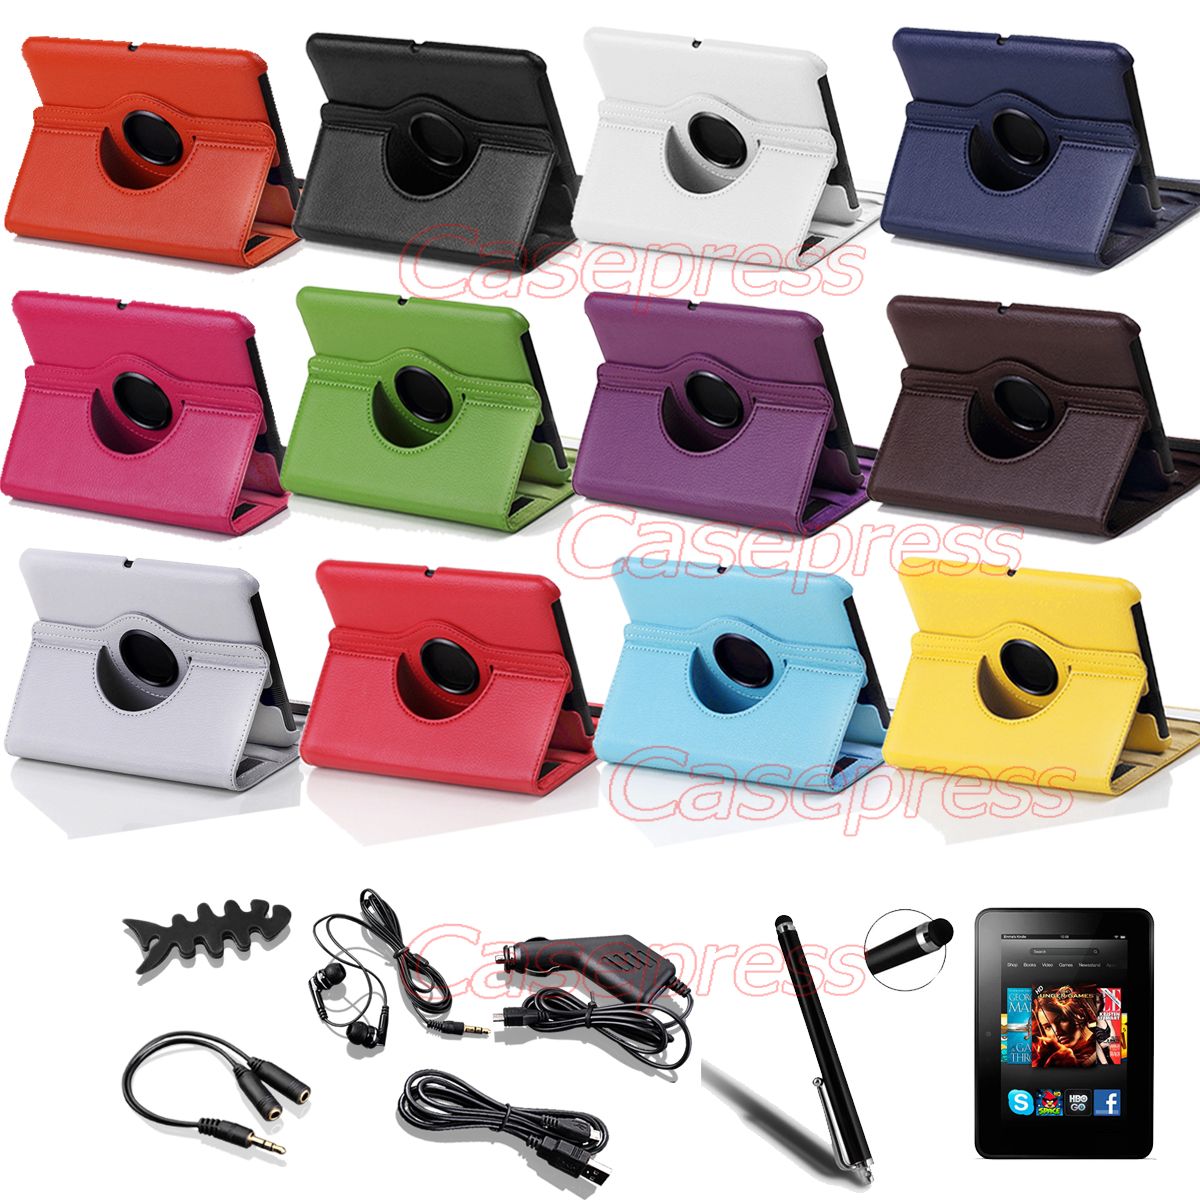 360 Degree Rotating Leather Case Cover Stand for  Kindle Fire HD 